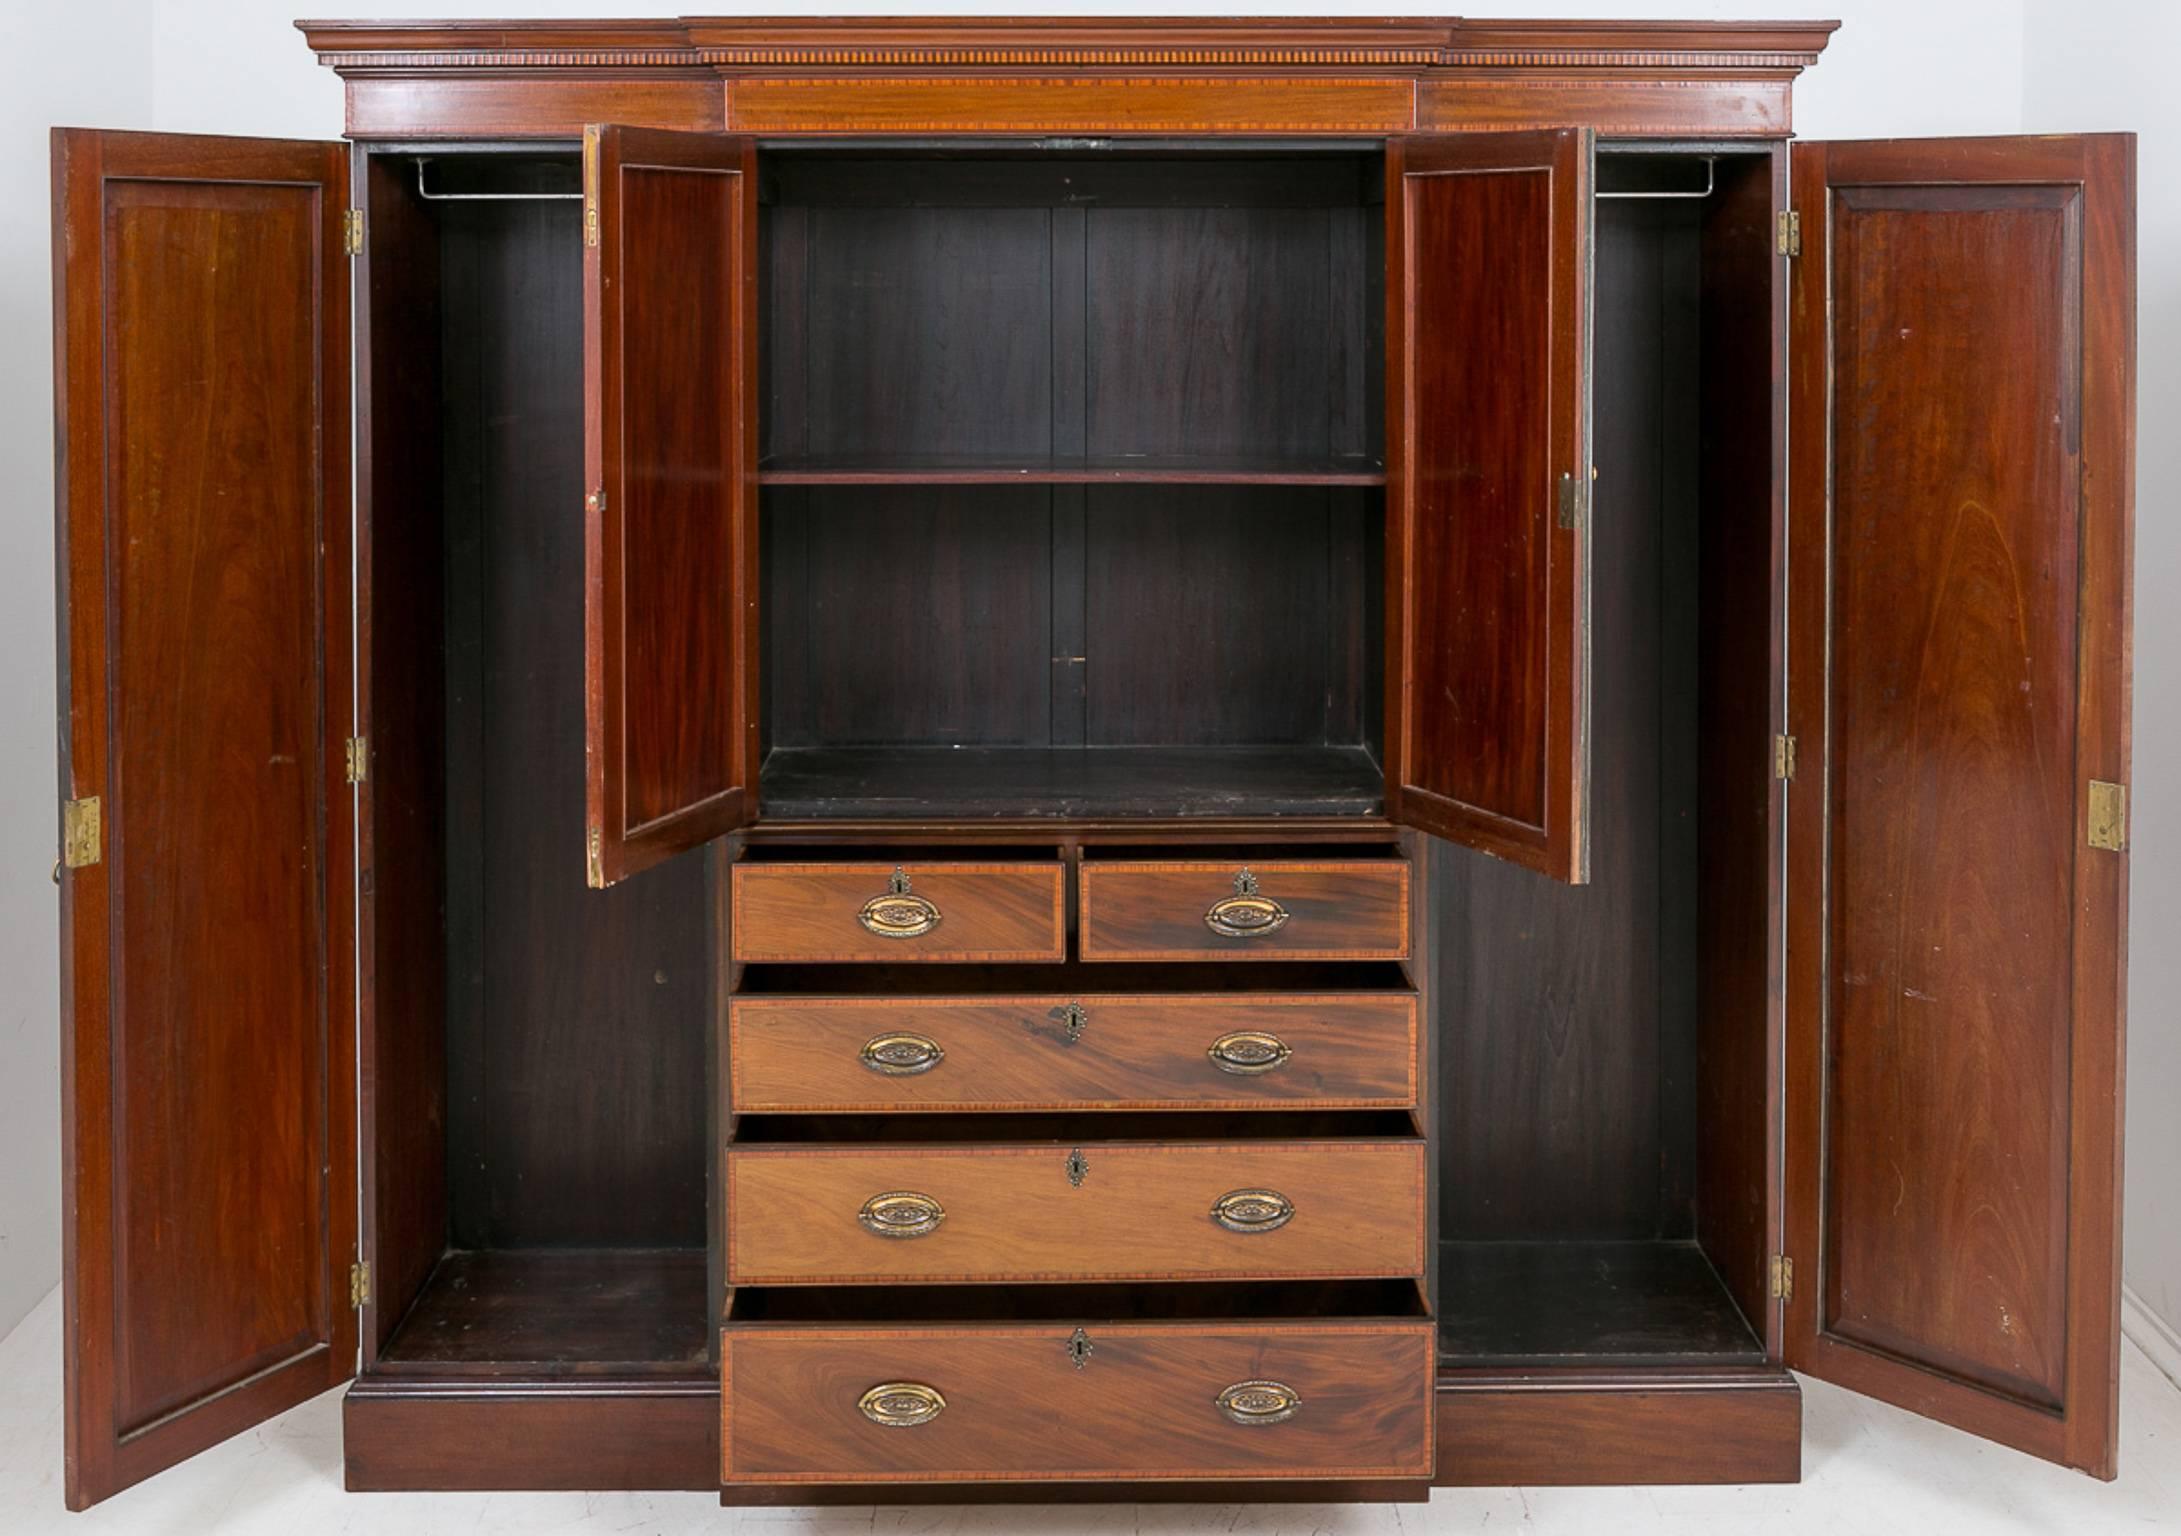 Sheraton Revival mahogany breakfront wardrobe standing on a plinth base.
The centre section having a two over three chest and a two-door cupboard above, flanked by full length hanging spaces.
Original locks and handles.
This piece is inlaid with